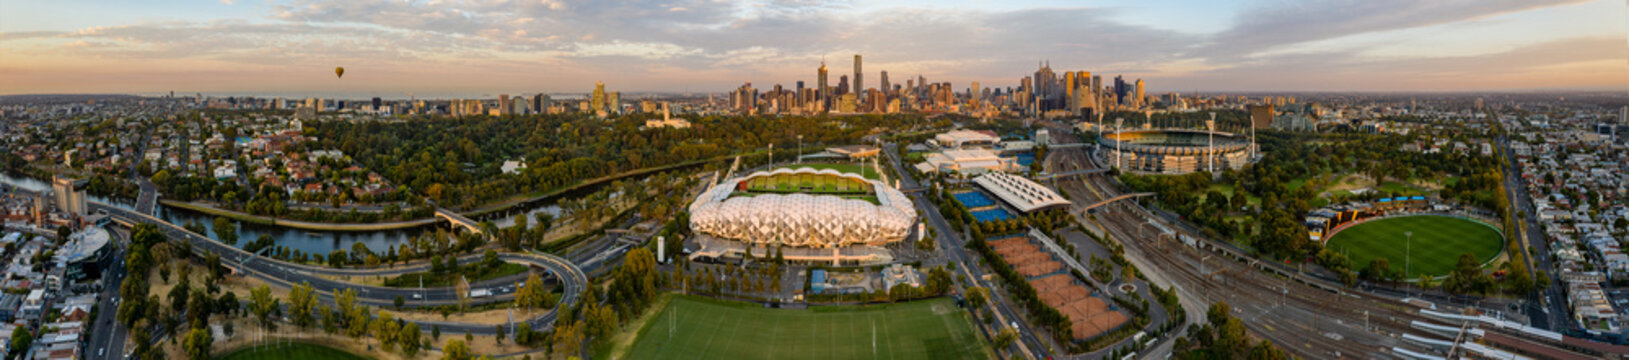 Melbourne Australia May 15th 2020 : Melbourne Australia March 9th 2019 : Aerial panoramic dawn view of the MCG and AAMI stadium, with the CBD in the background